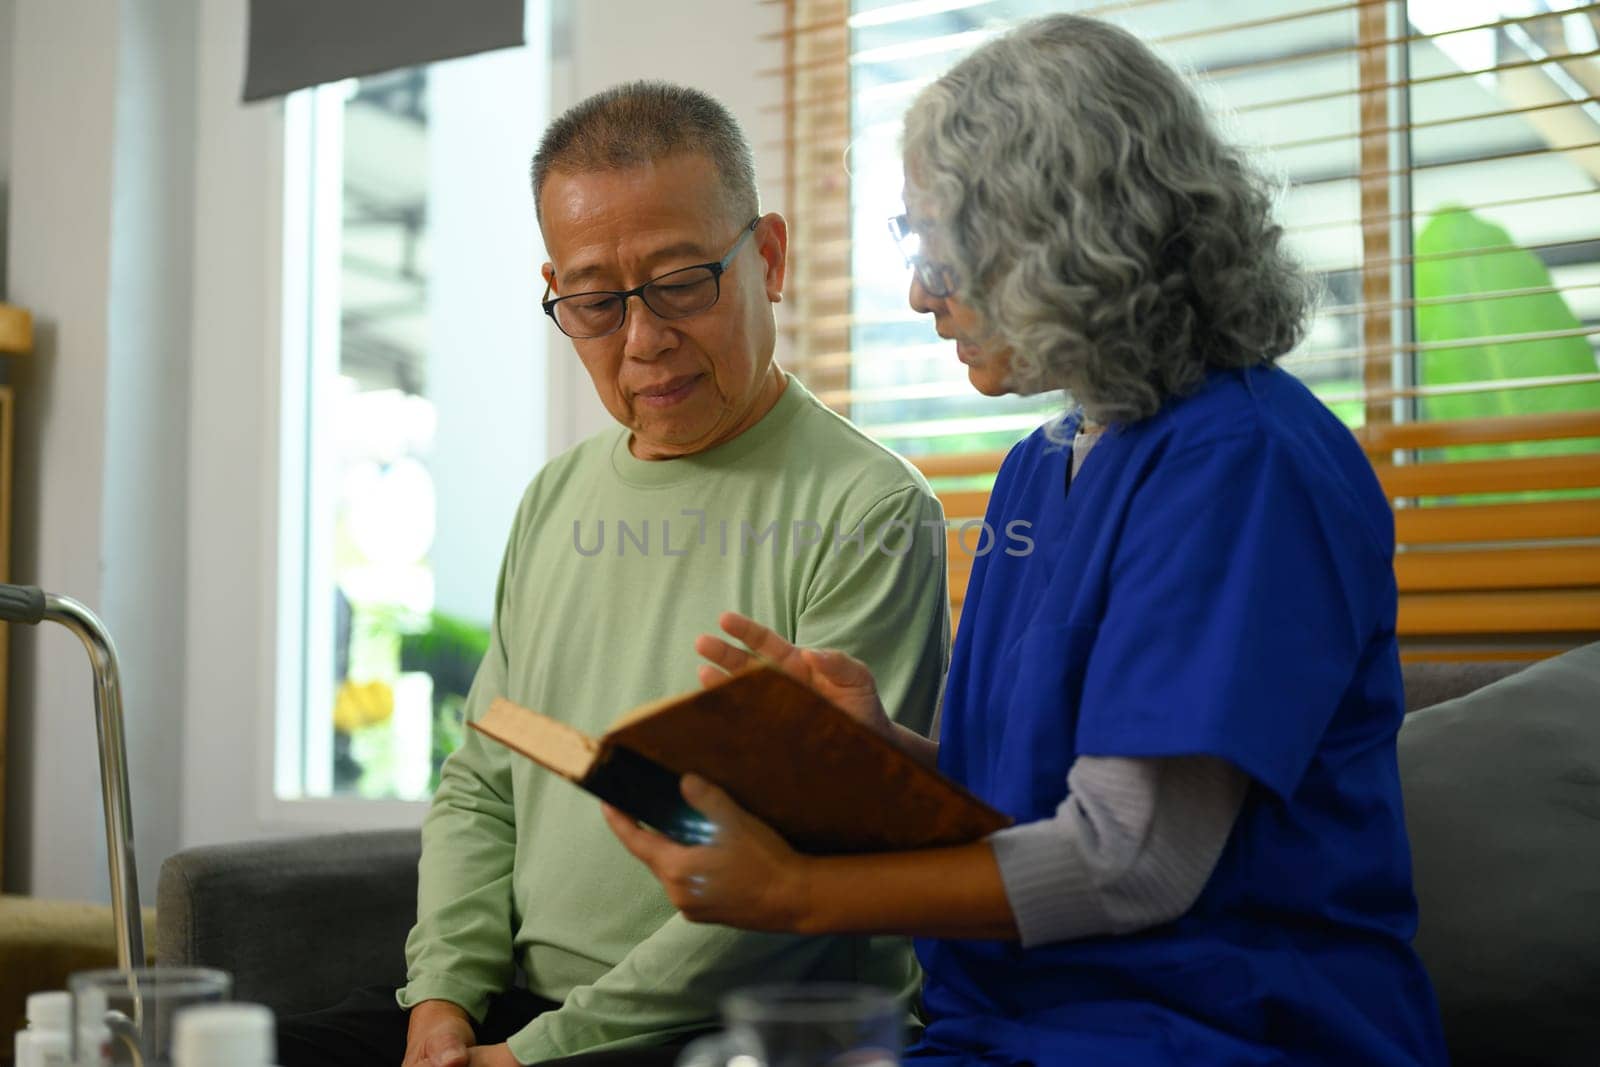 Nurse reading book to elderly man on sofa at nursing home. Volunteer and home health care service concept.